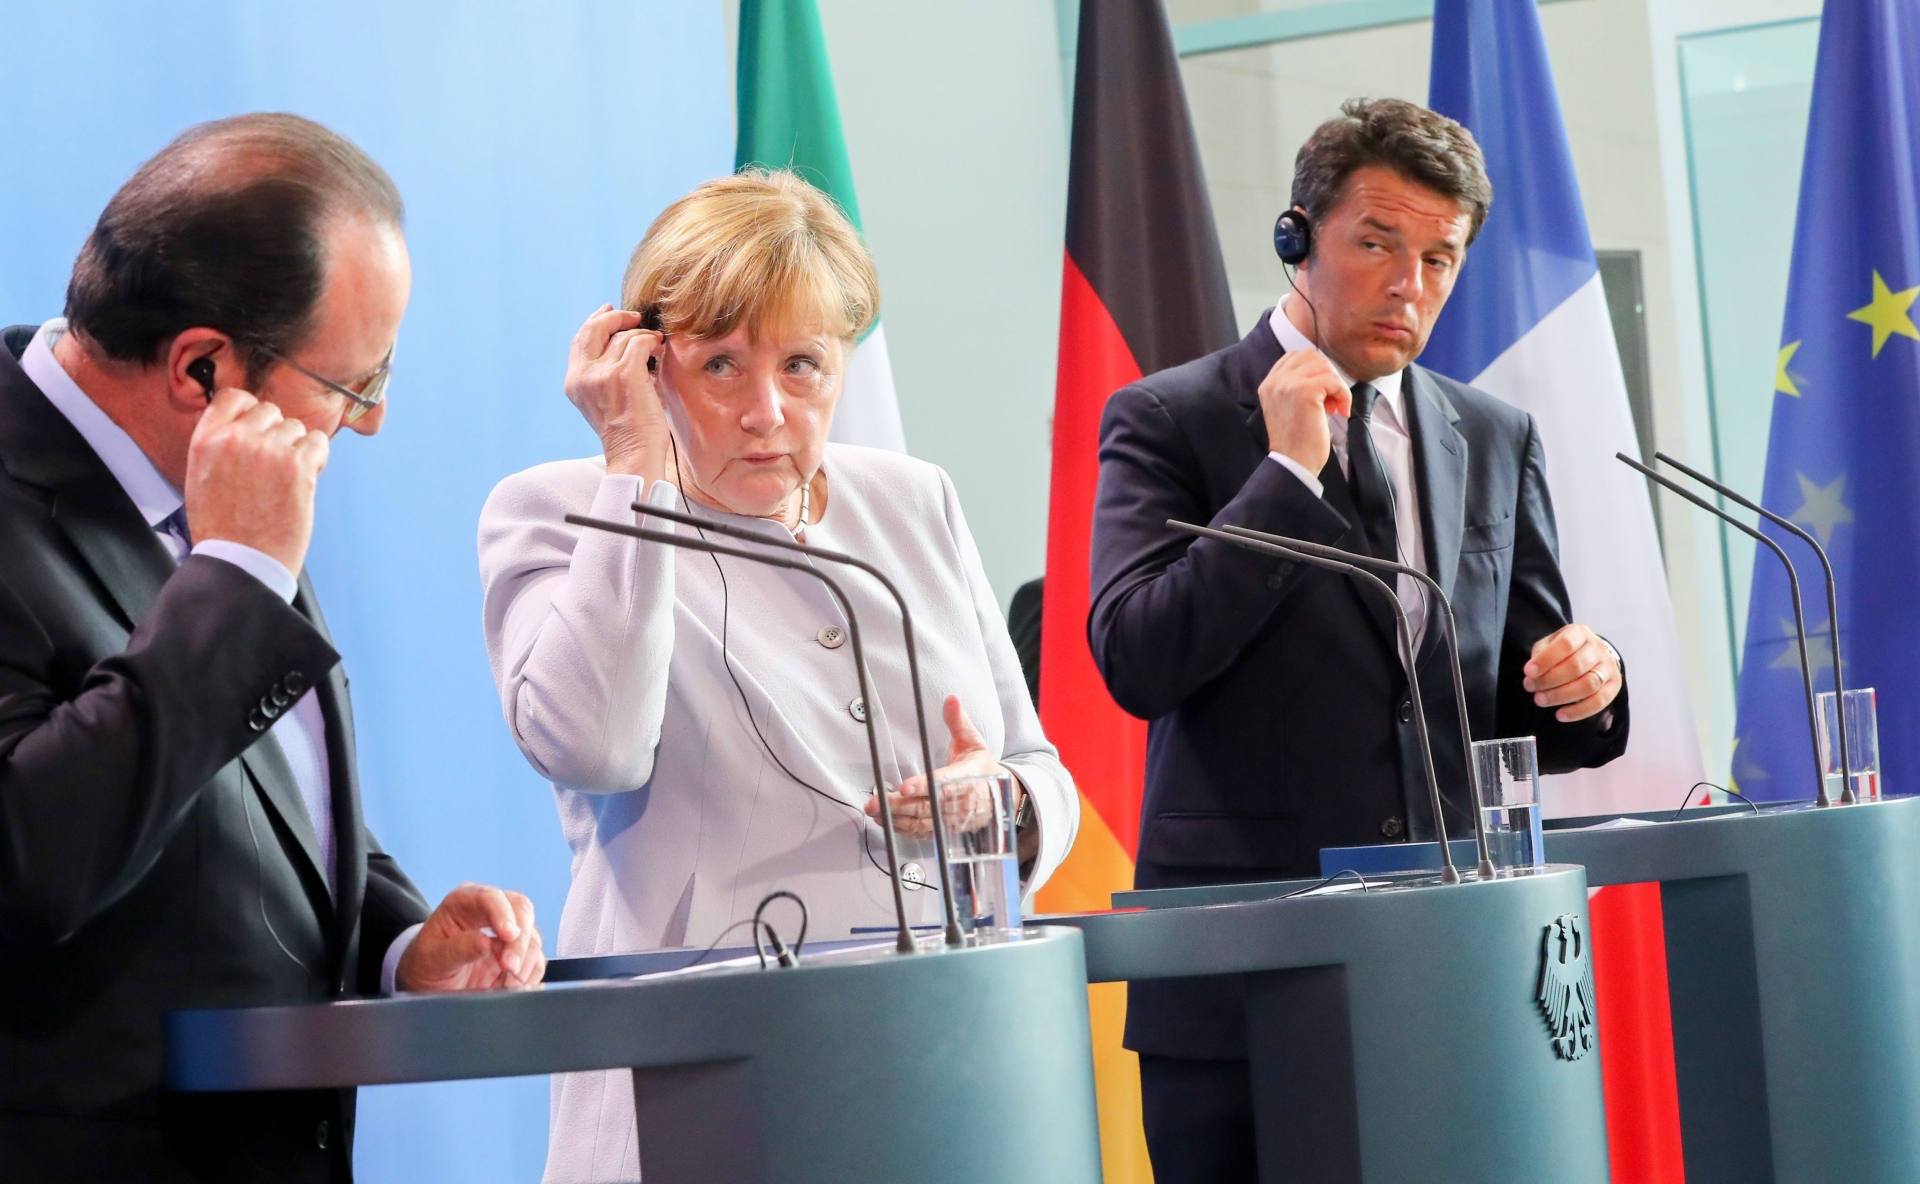 epa05394889 German Chancellor Angela Merkel (C) speaking alongside French President Francois Hollande (L) and Italian Prime Minister Matteo Renzi at a press conference, after meetings in the wake of Britain's referendum vote to leave the EU, in Berlin, Germany, 27 June 2016.  EPA/KAY NIETFELD GERMANY FRANCE ITALY BRITAIN EU REFERENDUM AFTERMATH